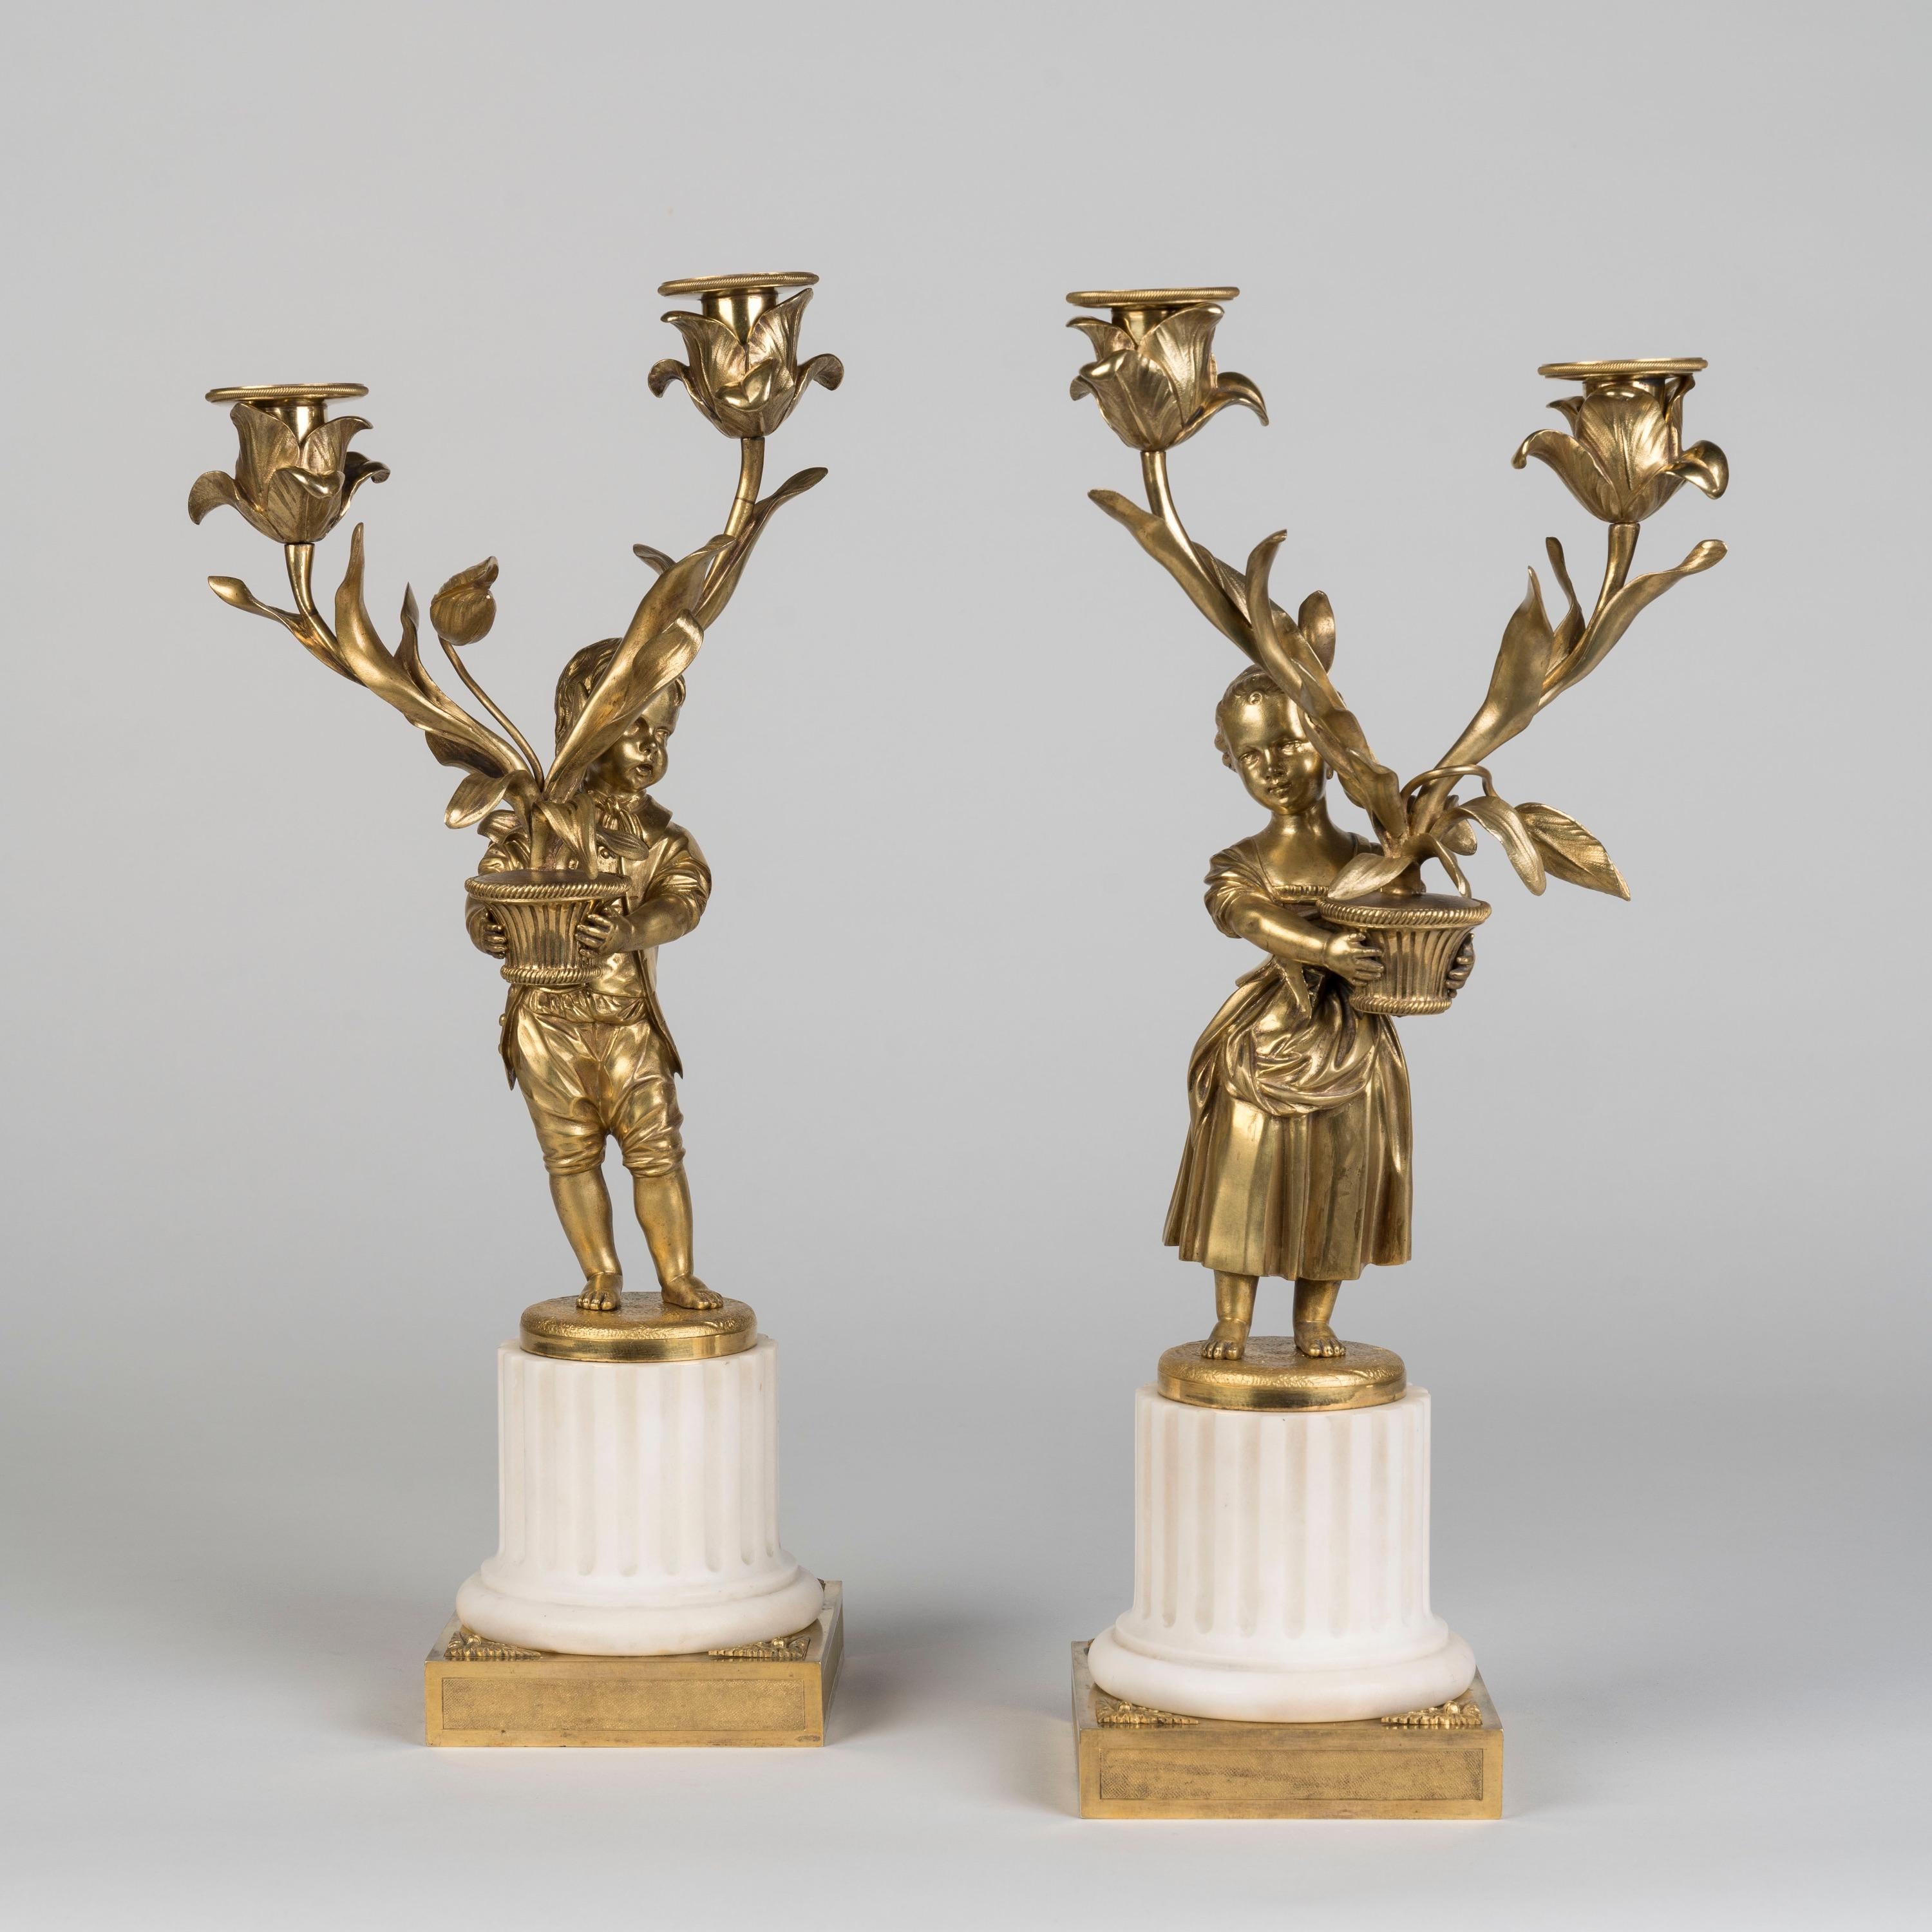 A Fine Pair of Figural Candelabra
Signed Eugène Hazart of Paris

Constructed in Carrara marble and finely cast gilt bronze, rising from a square gilt panelled base, each candelabrum with a fluted column surmounted by a figure of a child, holding a